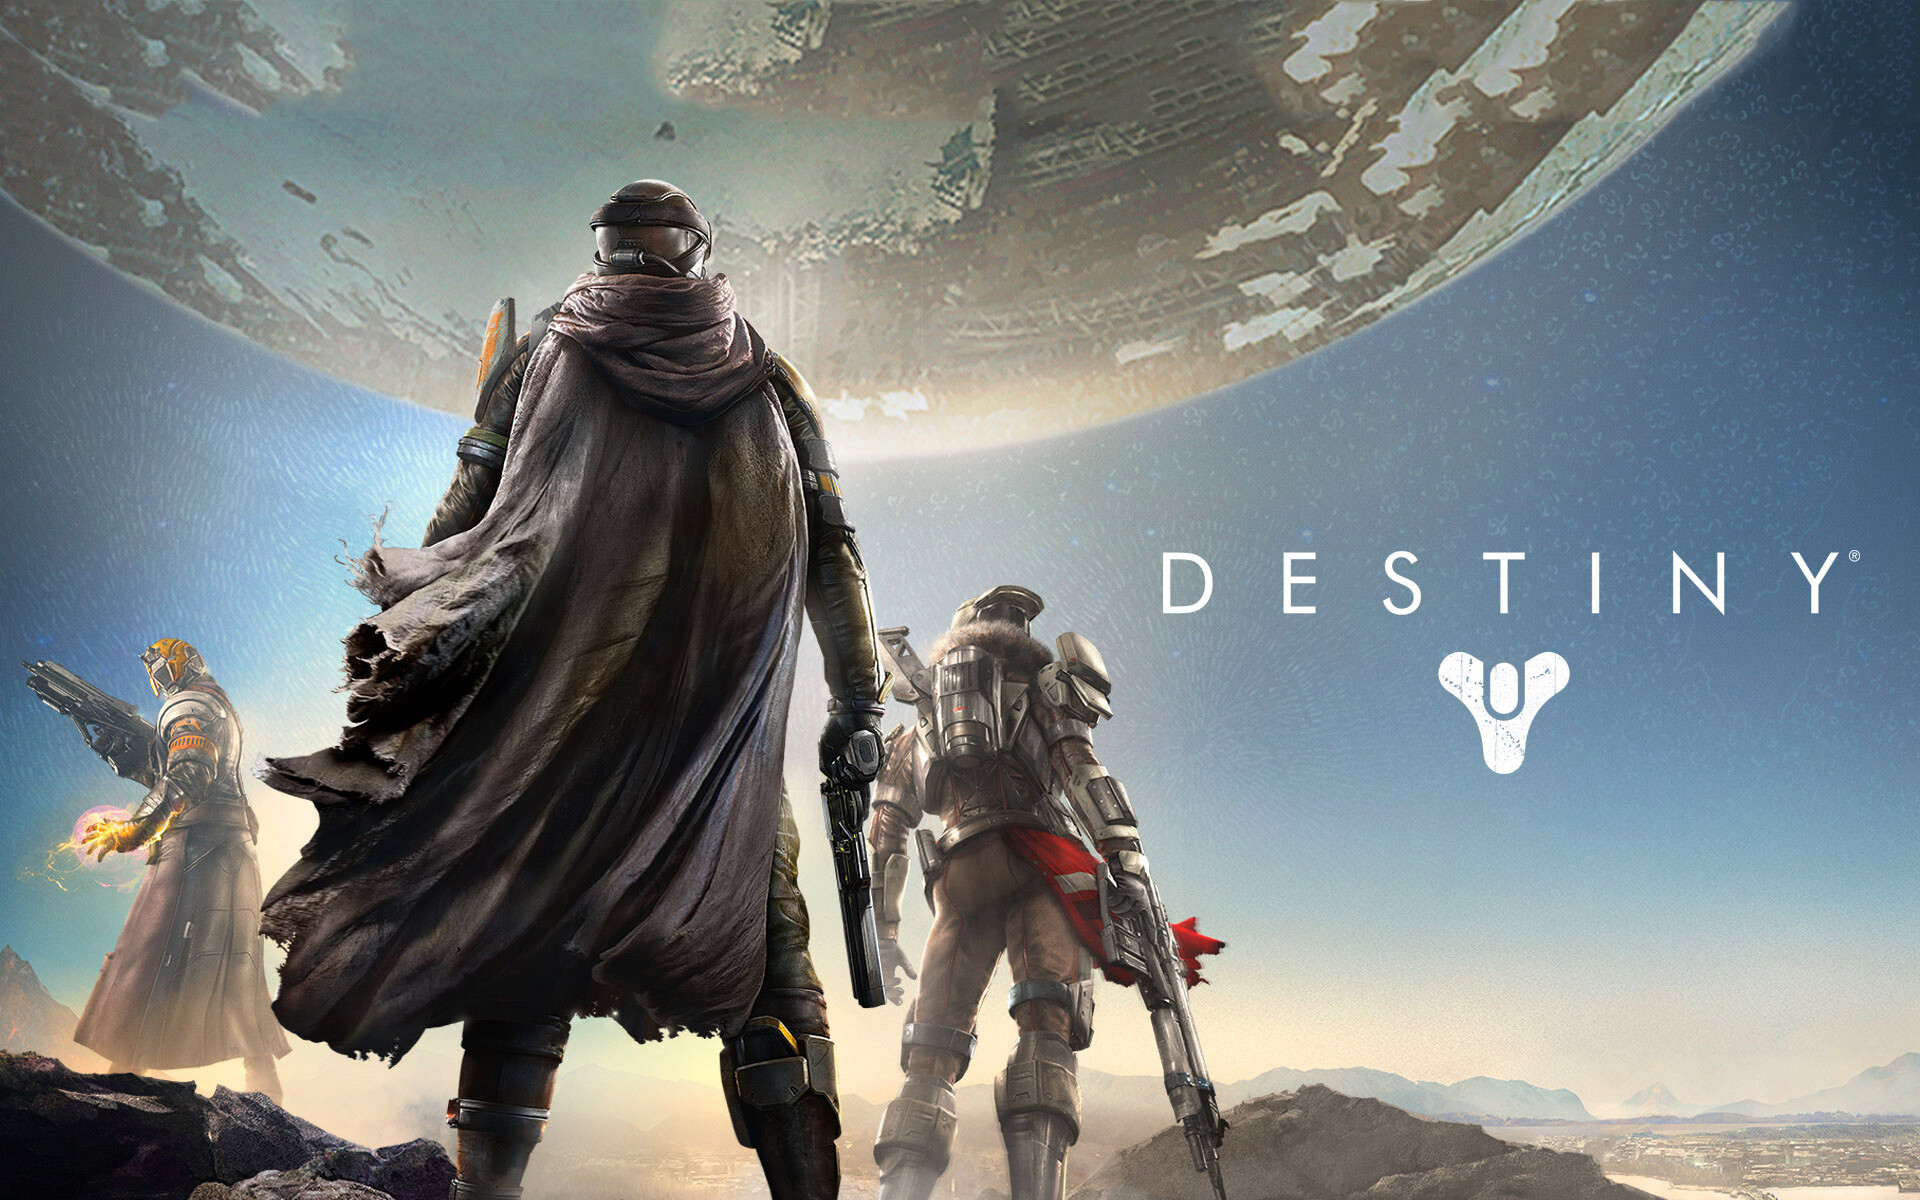 Destiny: Box art featuring the game's three character classes: Warlock on the left, Hunter on the center, and Titan on the right. 1920x1200 HD Wallpaper.